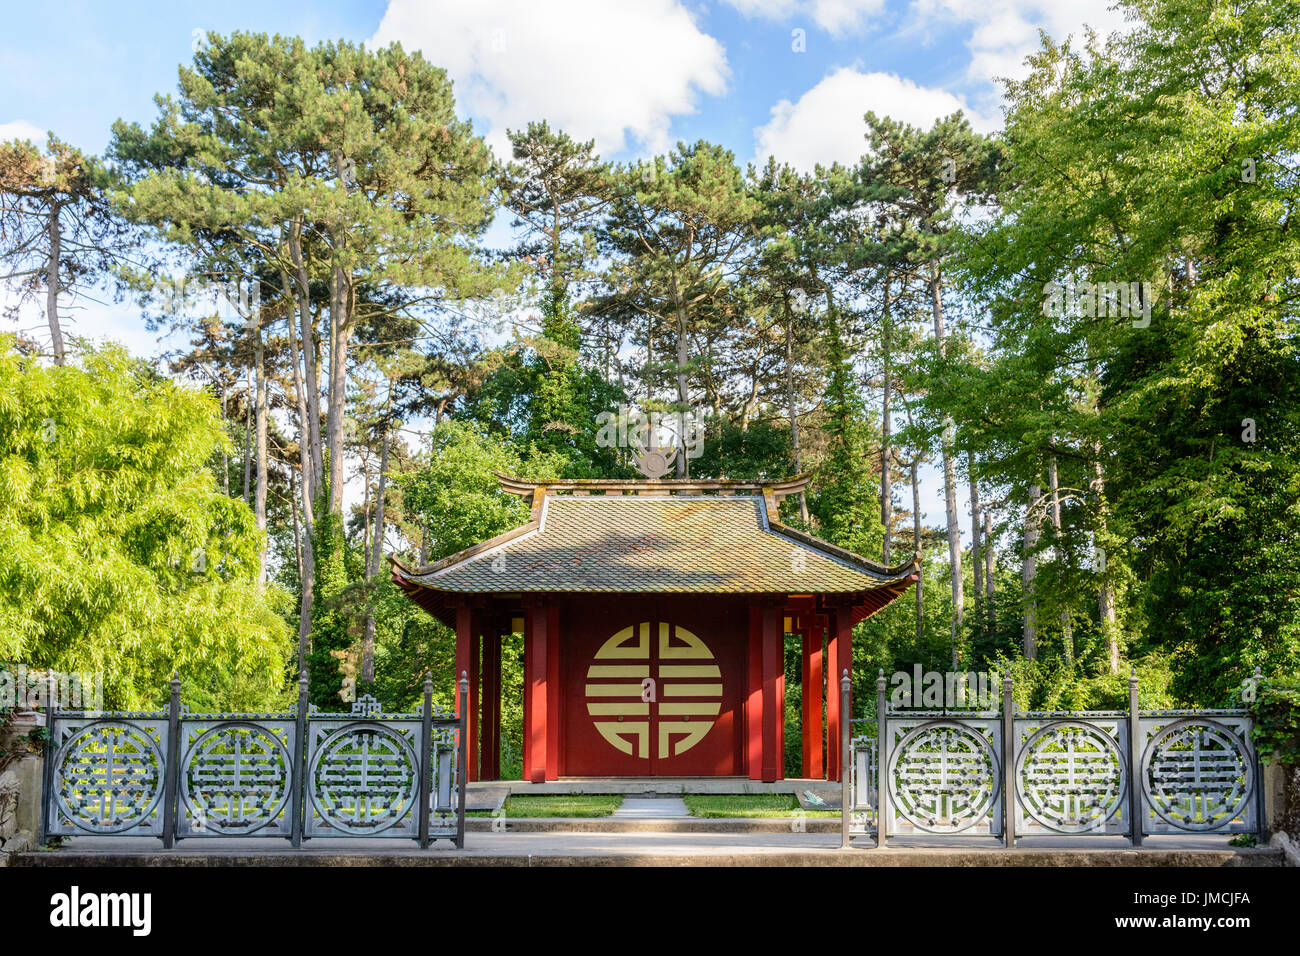 Front view of the Indochinese Memorial Temple in the Garden of Tropical Agronomy in Paris, dedicated to the Vietnamese soldiers who died for France. Stock Photo